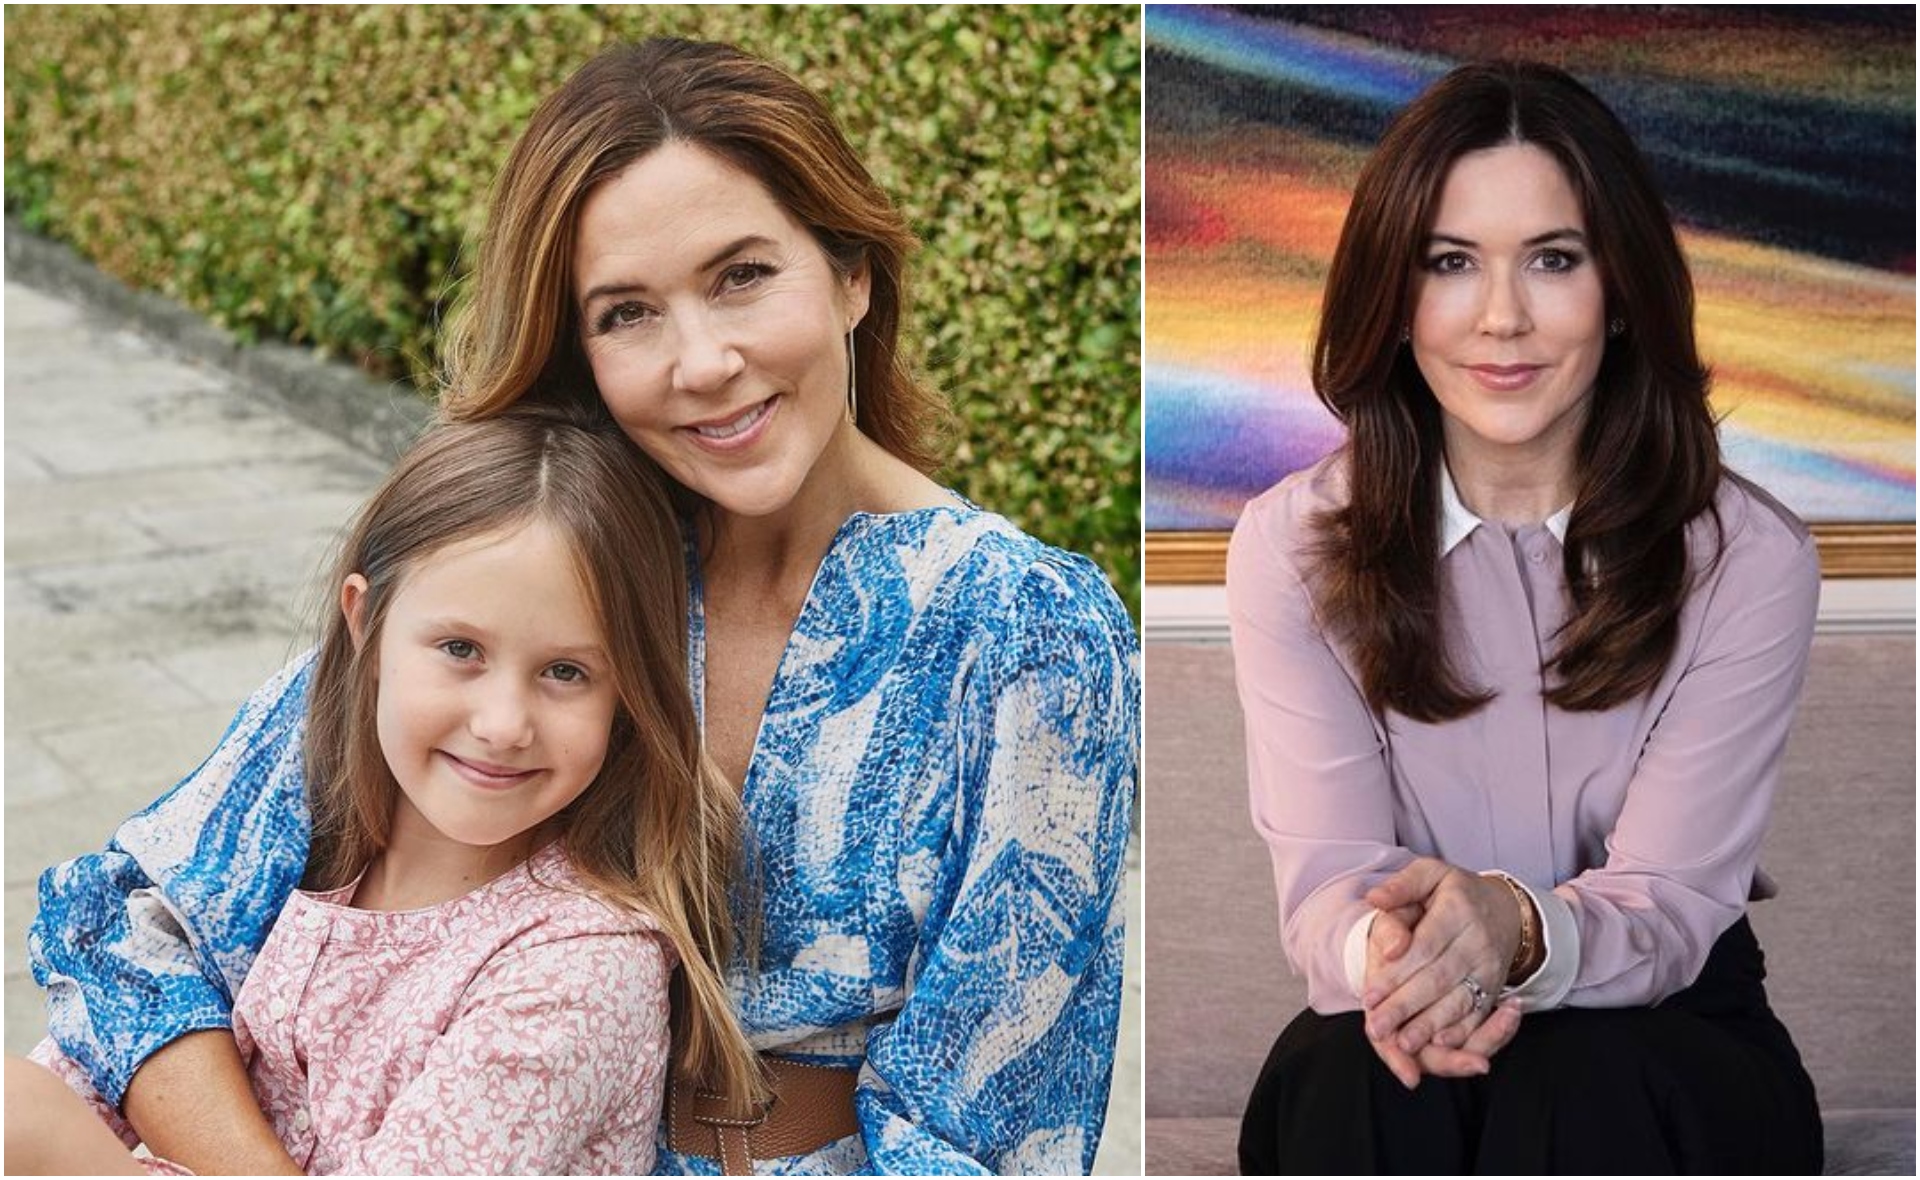 Crown Princess Mary shares a beautiful anecdote about her daughter, Josephine on International Women’s Day